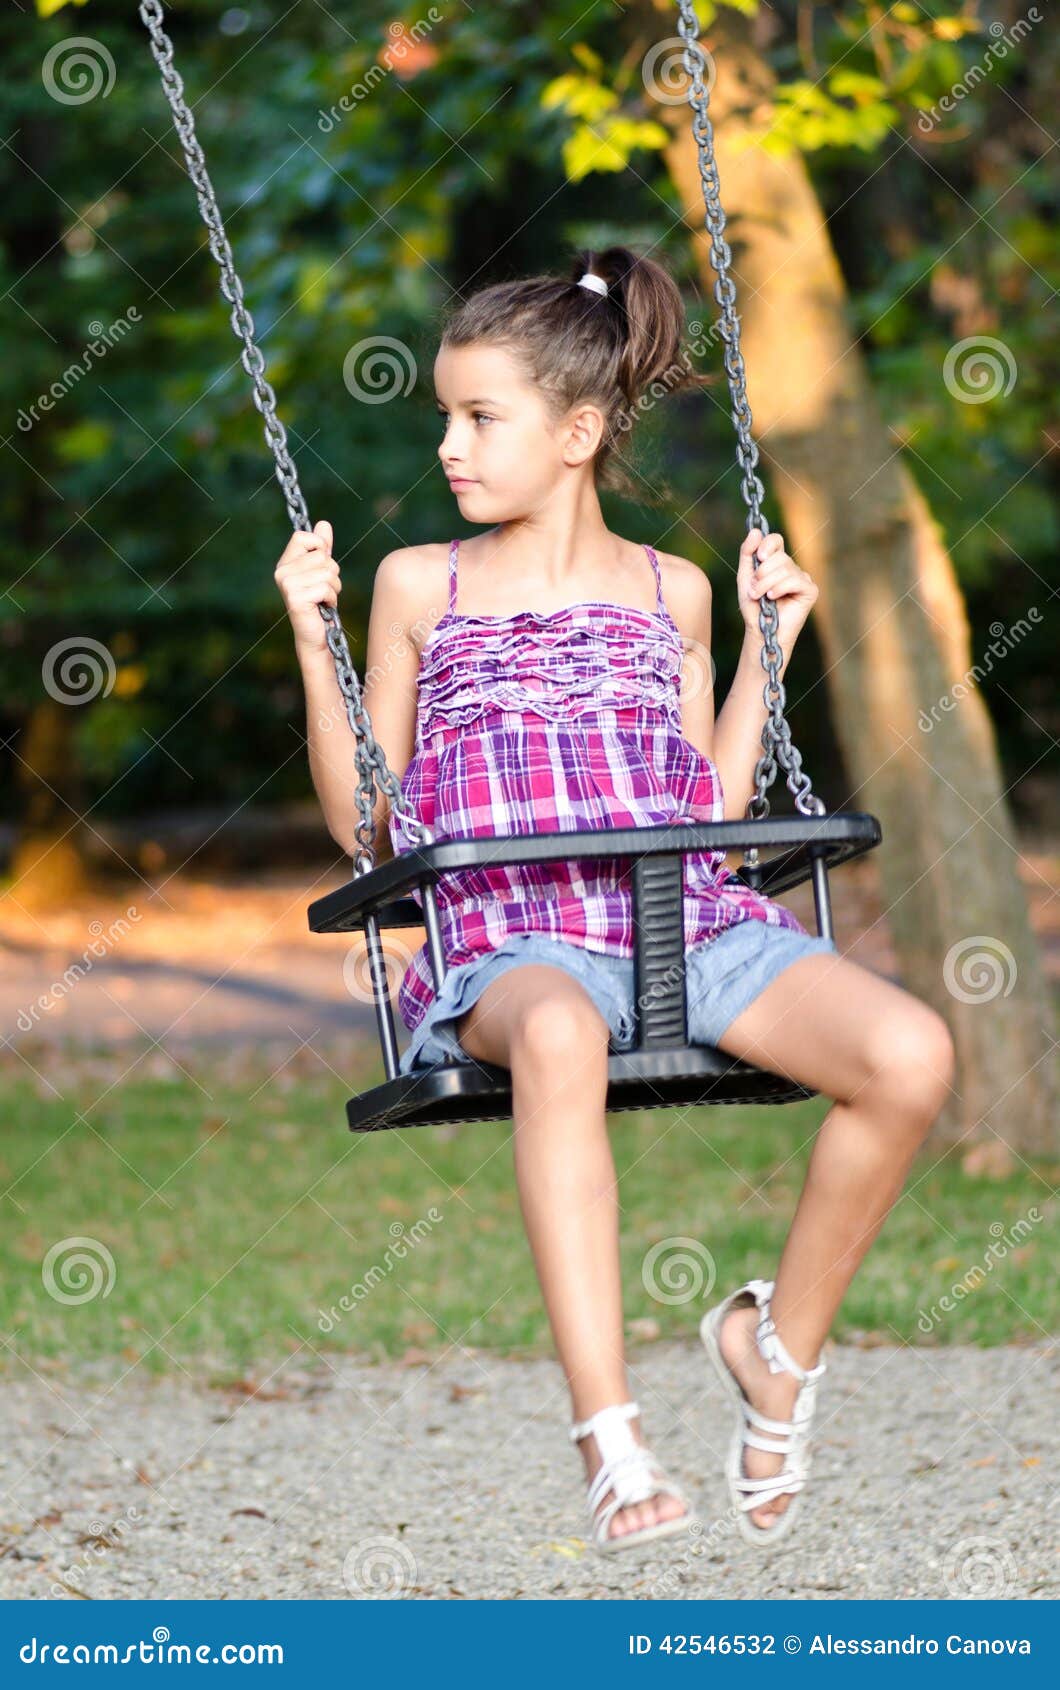 little girl playing on the swing